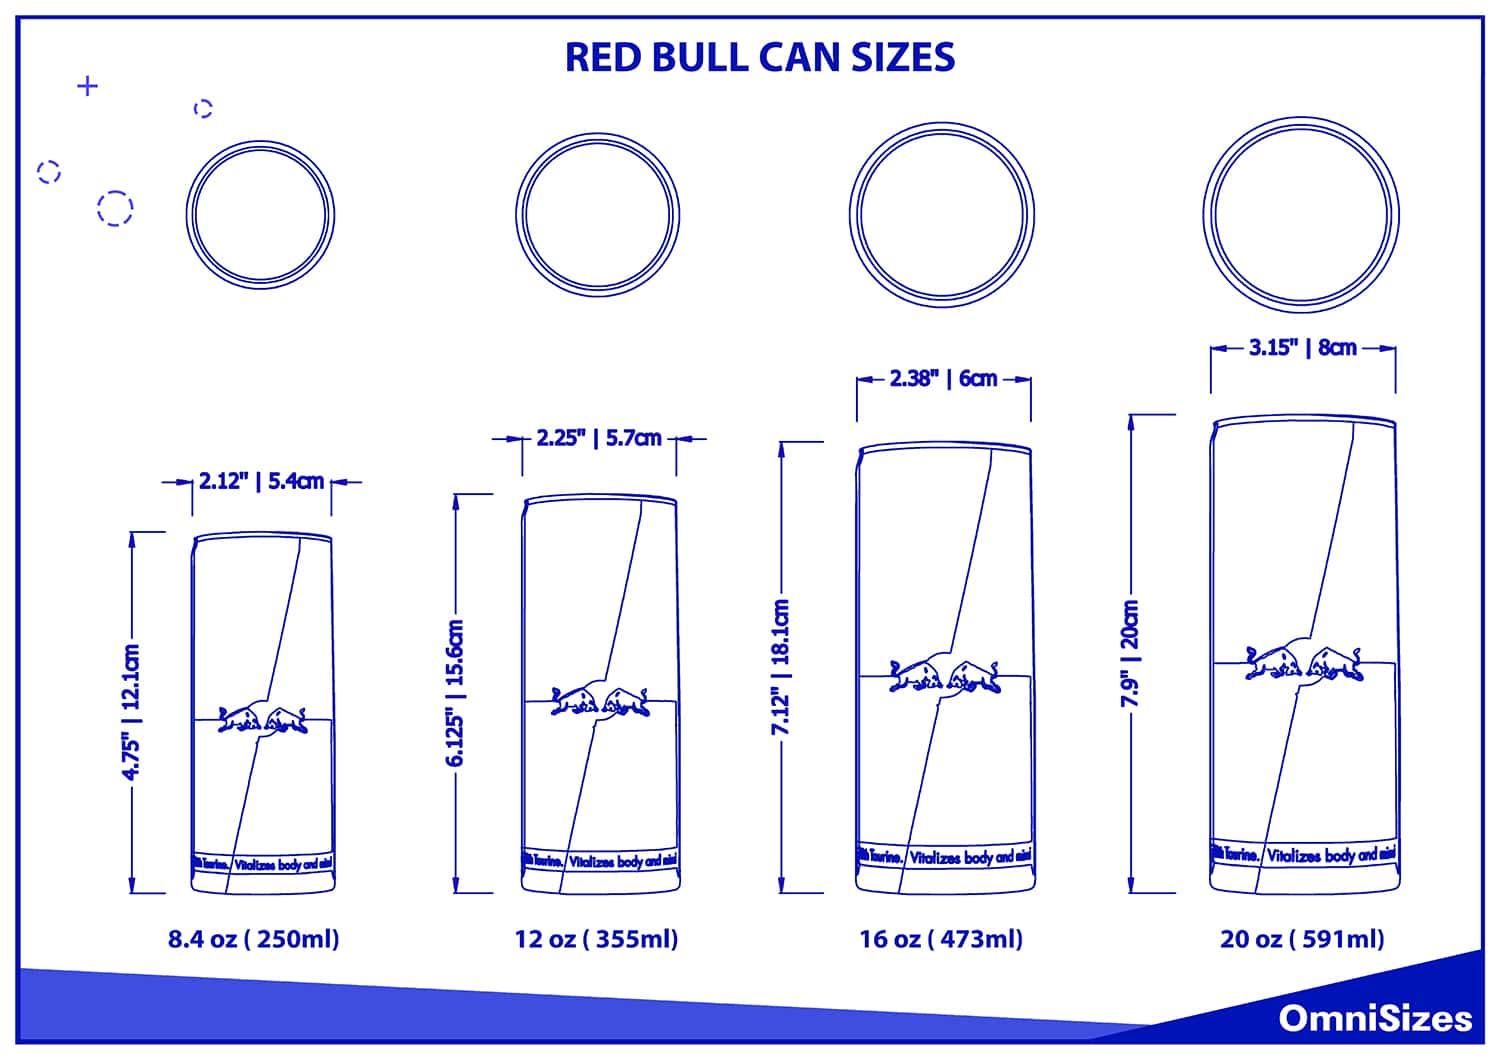 Red bull can sizes